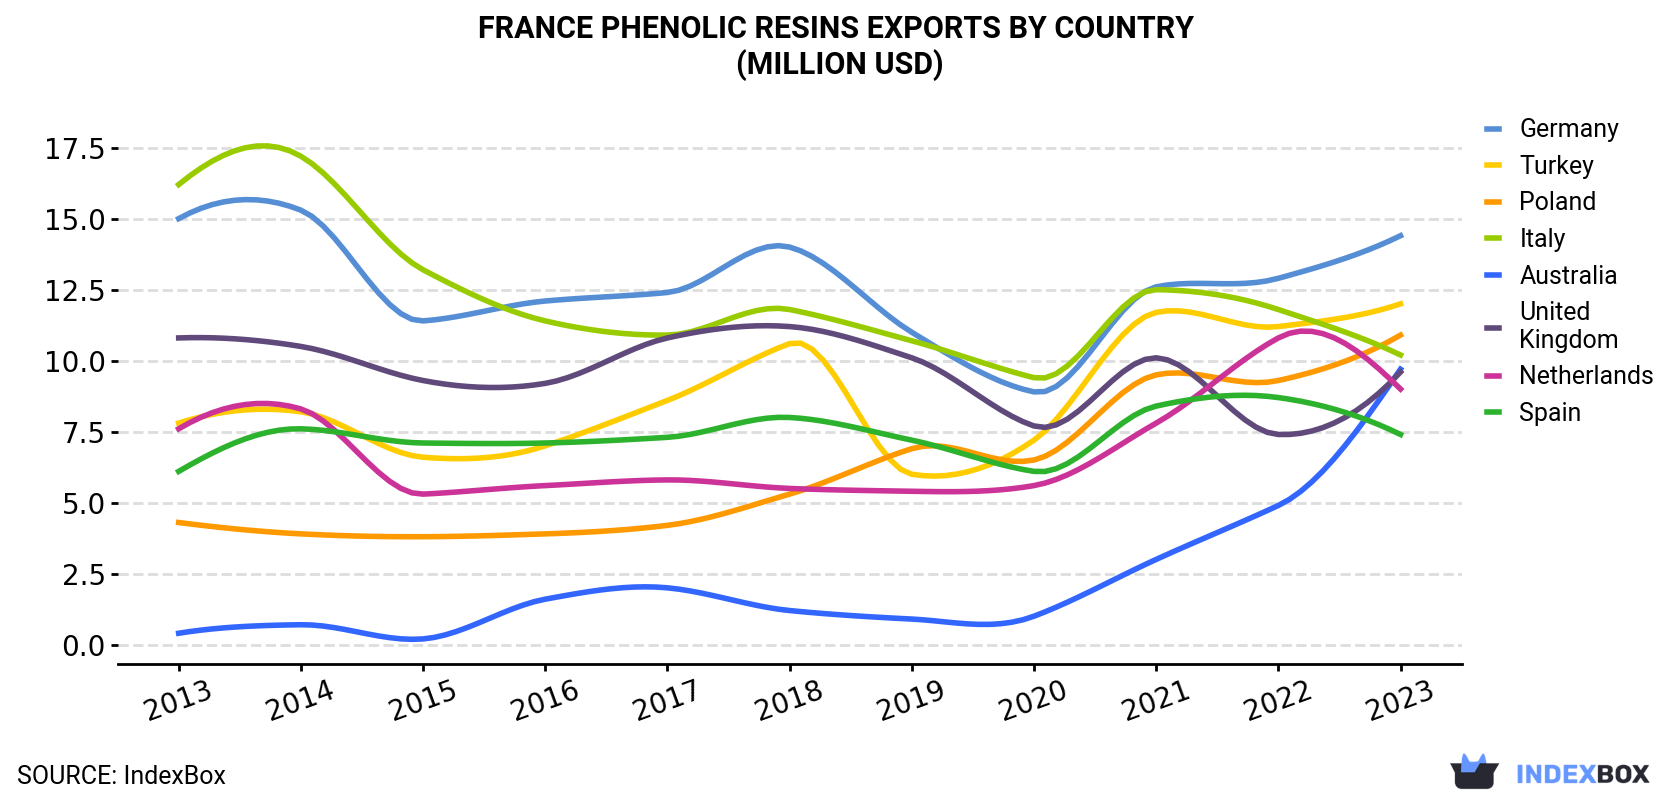 France Phenolic Resins Exports By Country (Million USD)